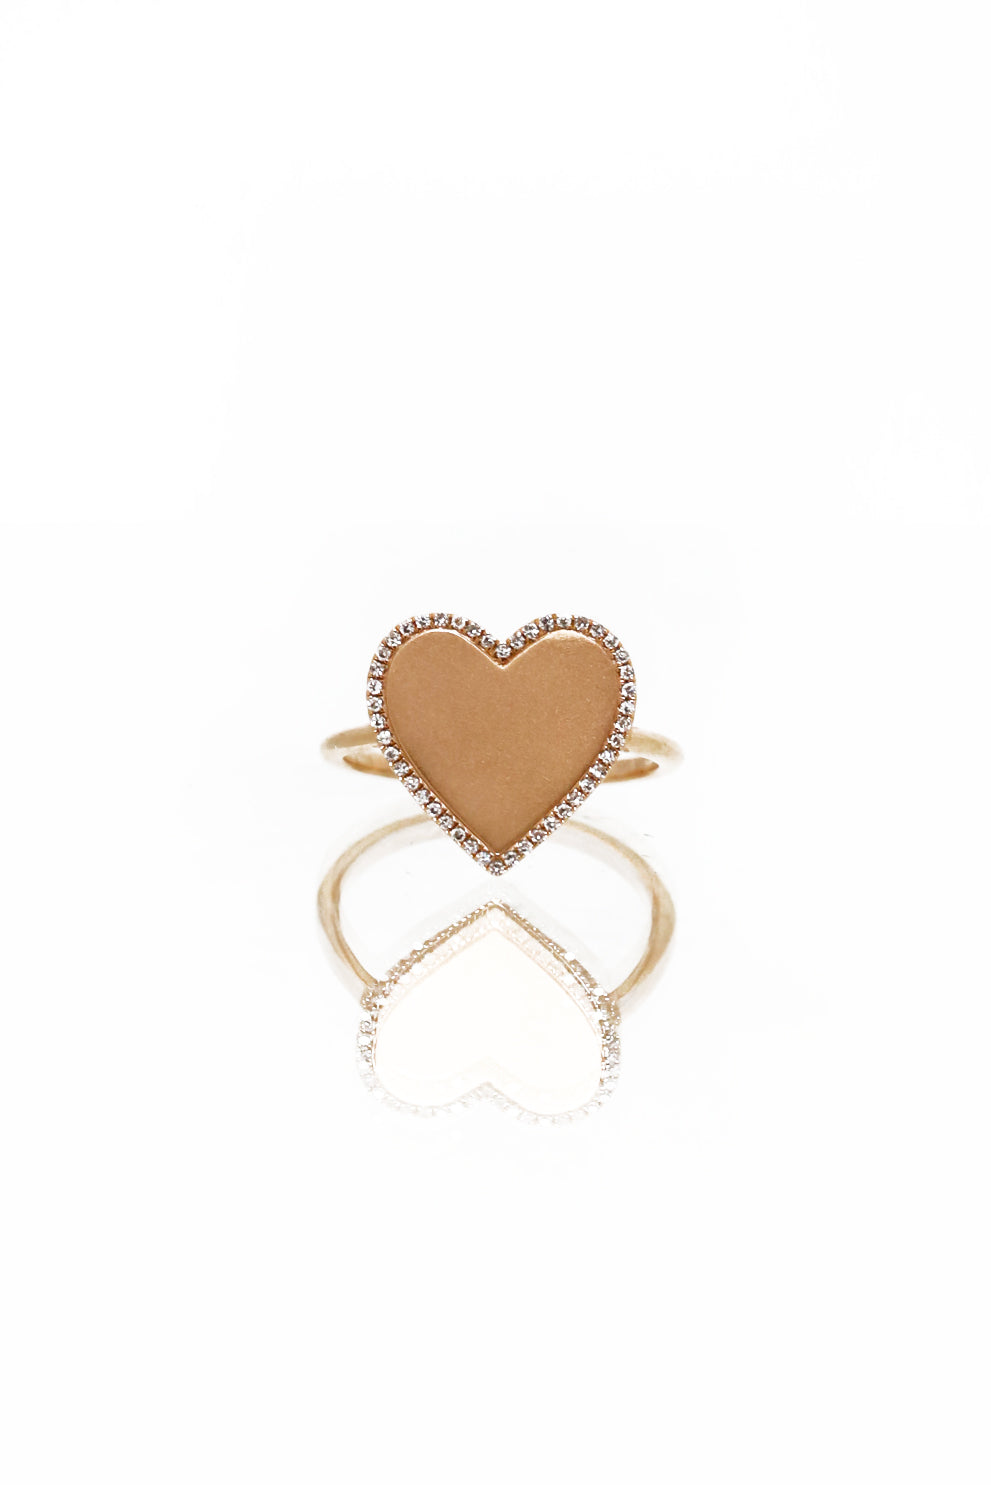 14K .10 DIA HEART RING - Kingfisher Road - Online Boutique